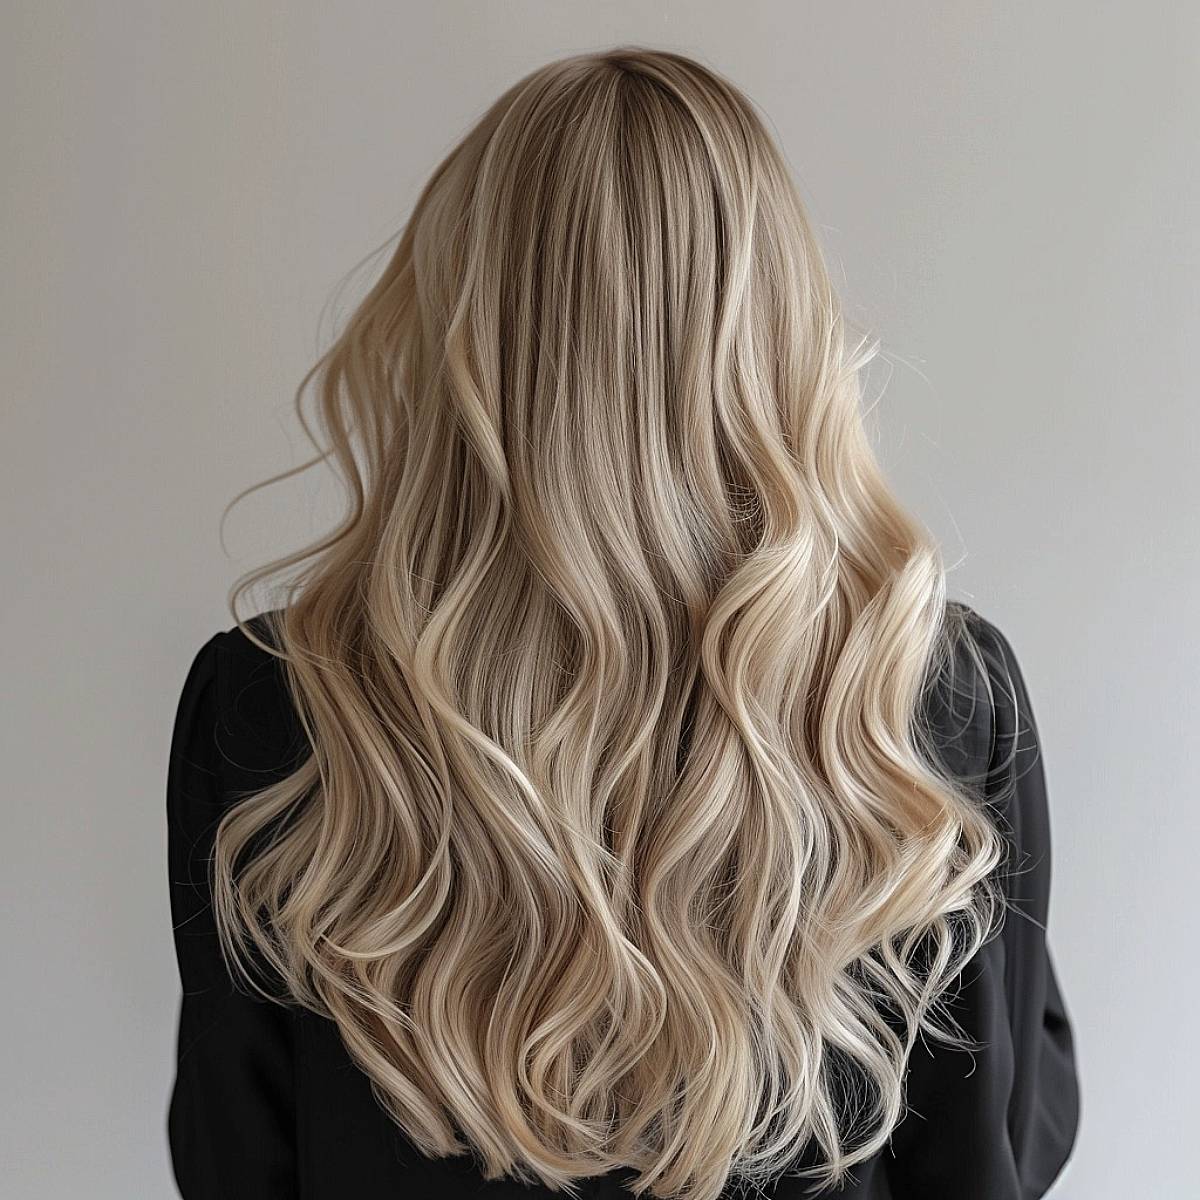 Gorgeous Hair Colour Ideas That Worth Trying – Blending blonde